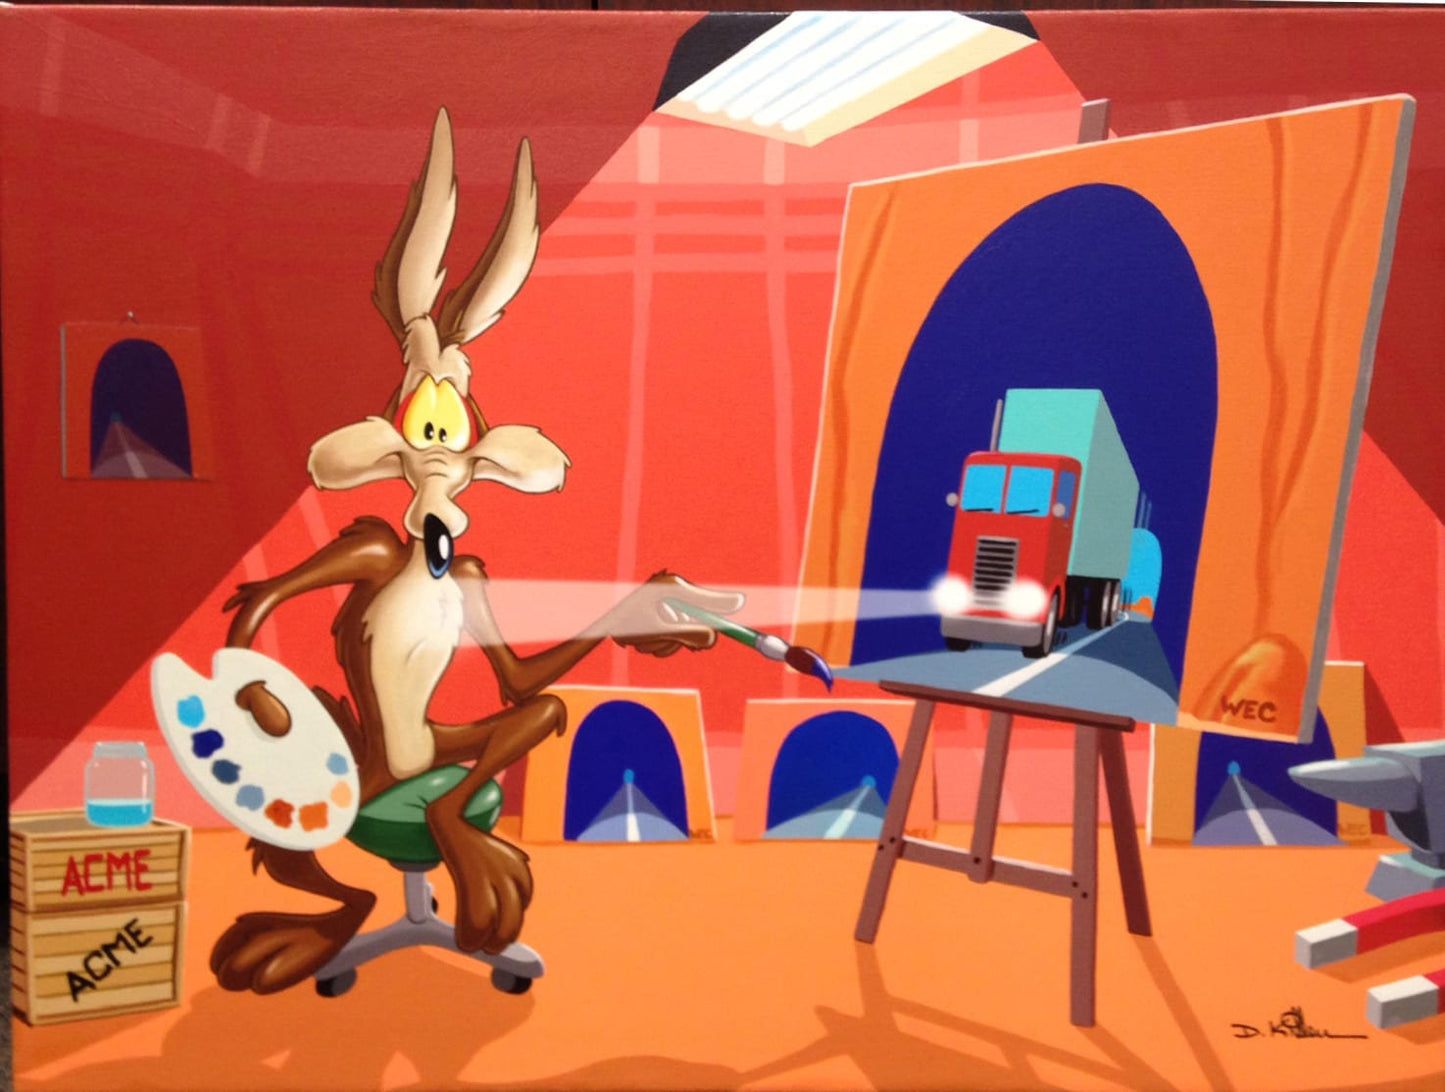 Daniel Killen Signed Semi-Struck Wile E Coyote Warner Brothers Limited Edition of 25 Giclee on Canvas